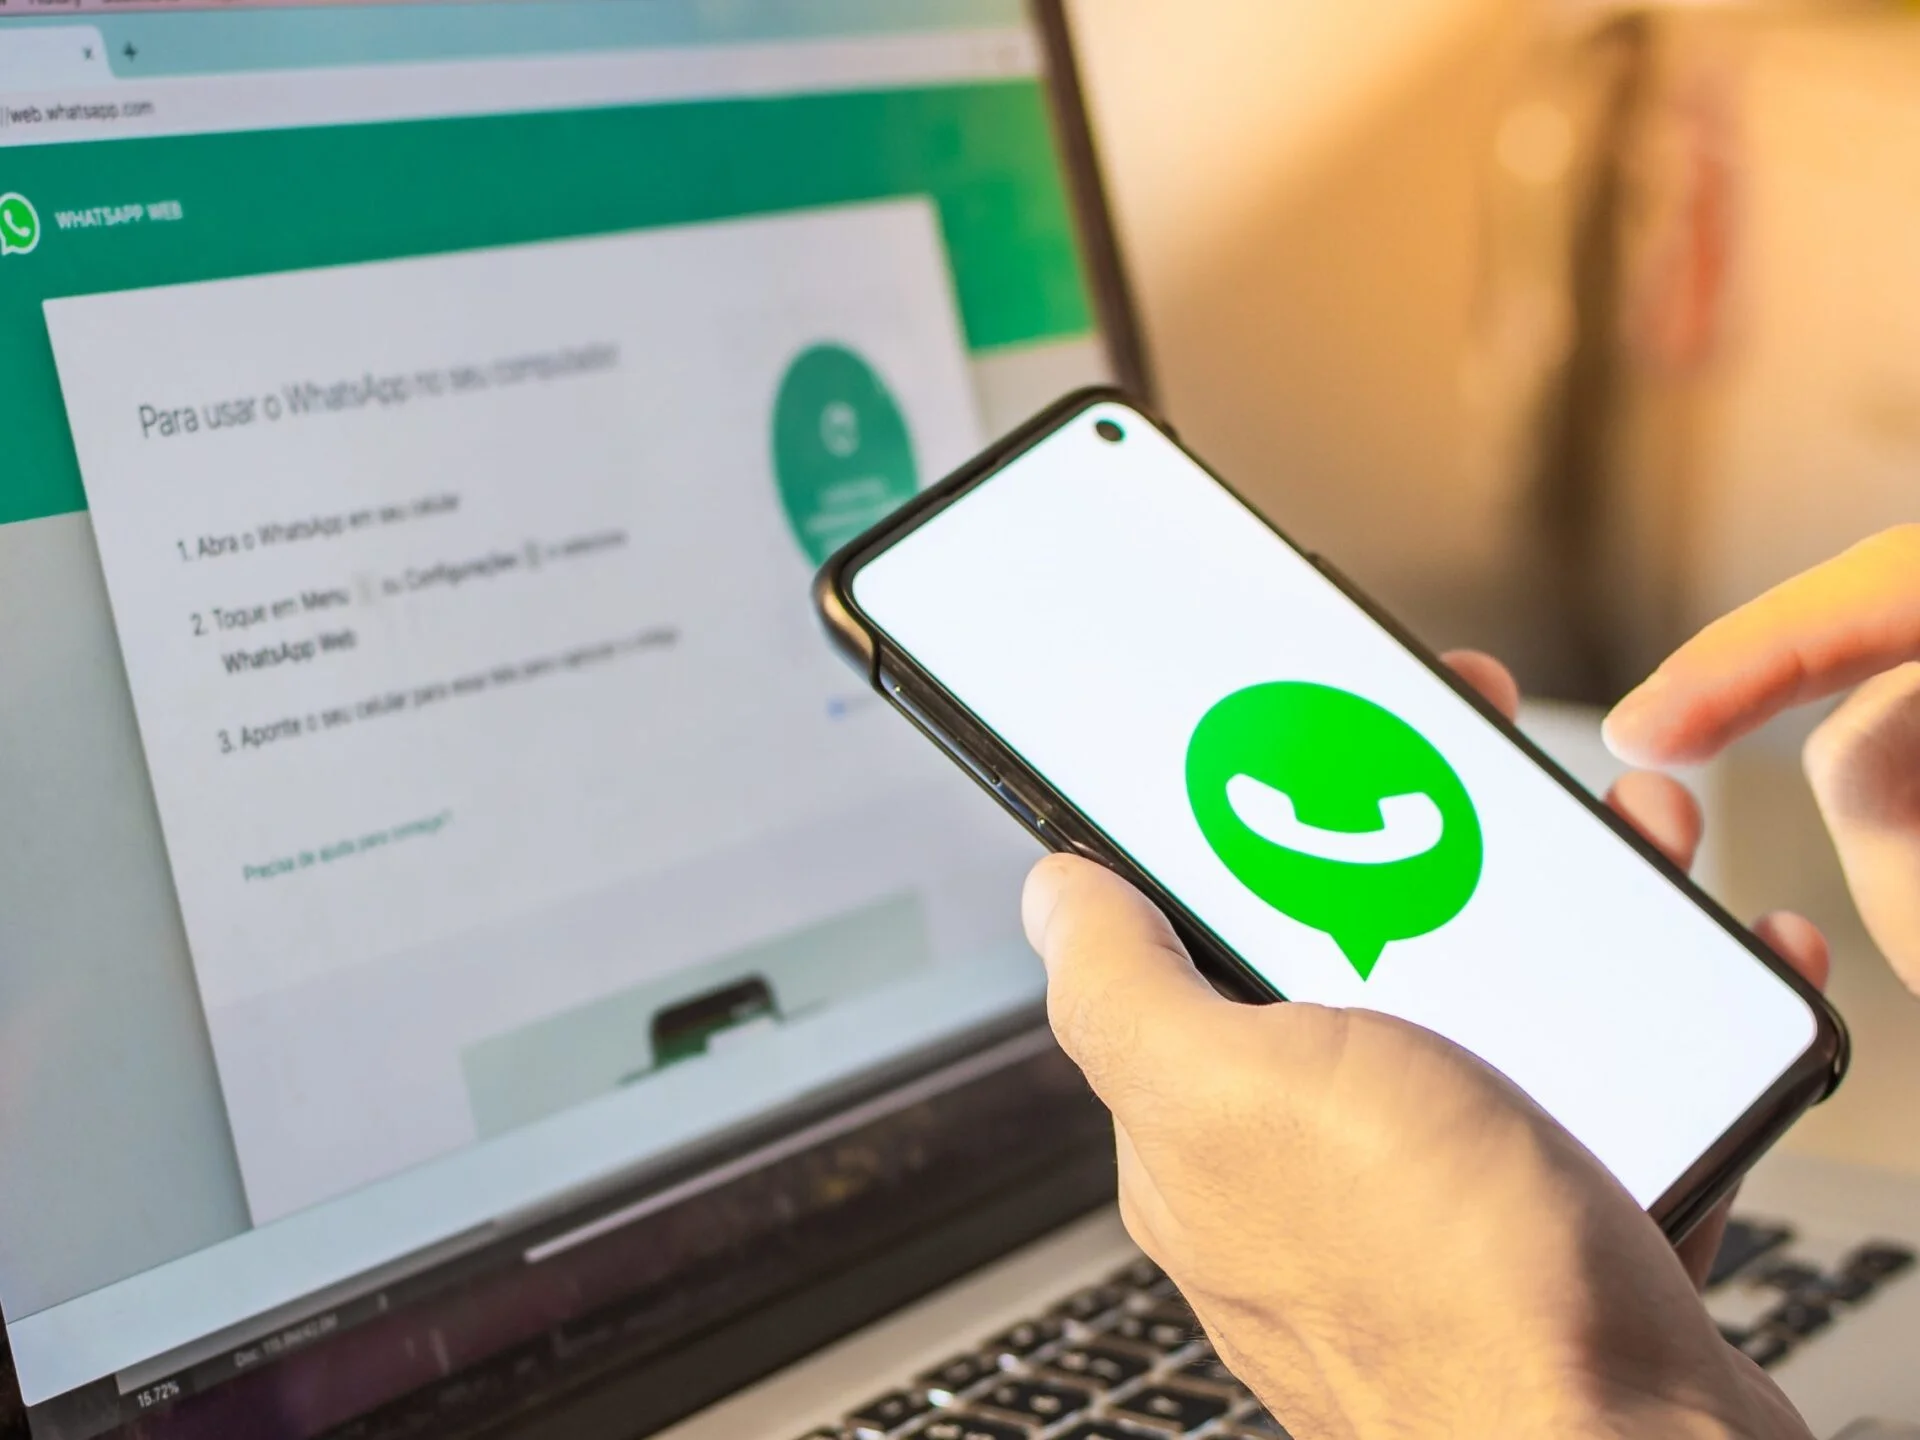 WhatsApp will now be able to chat with users of other instant messengers